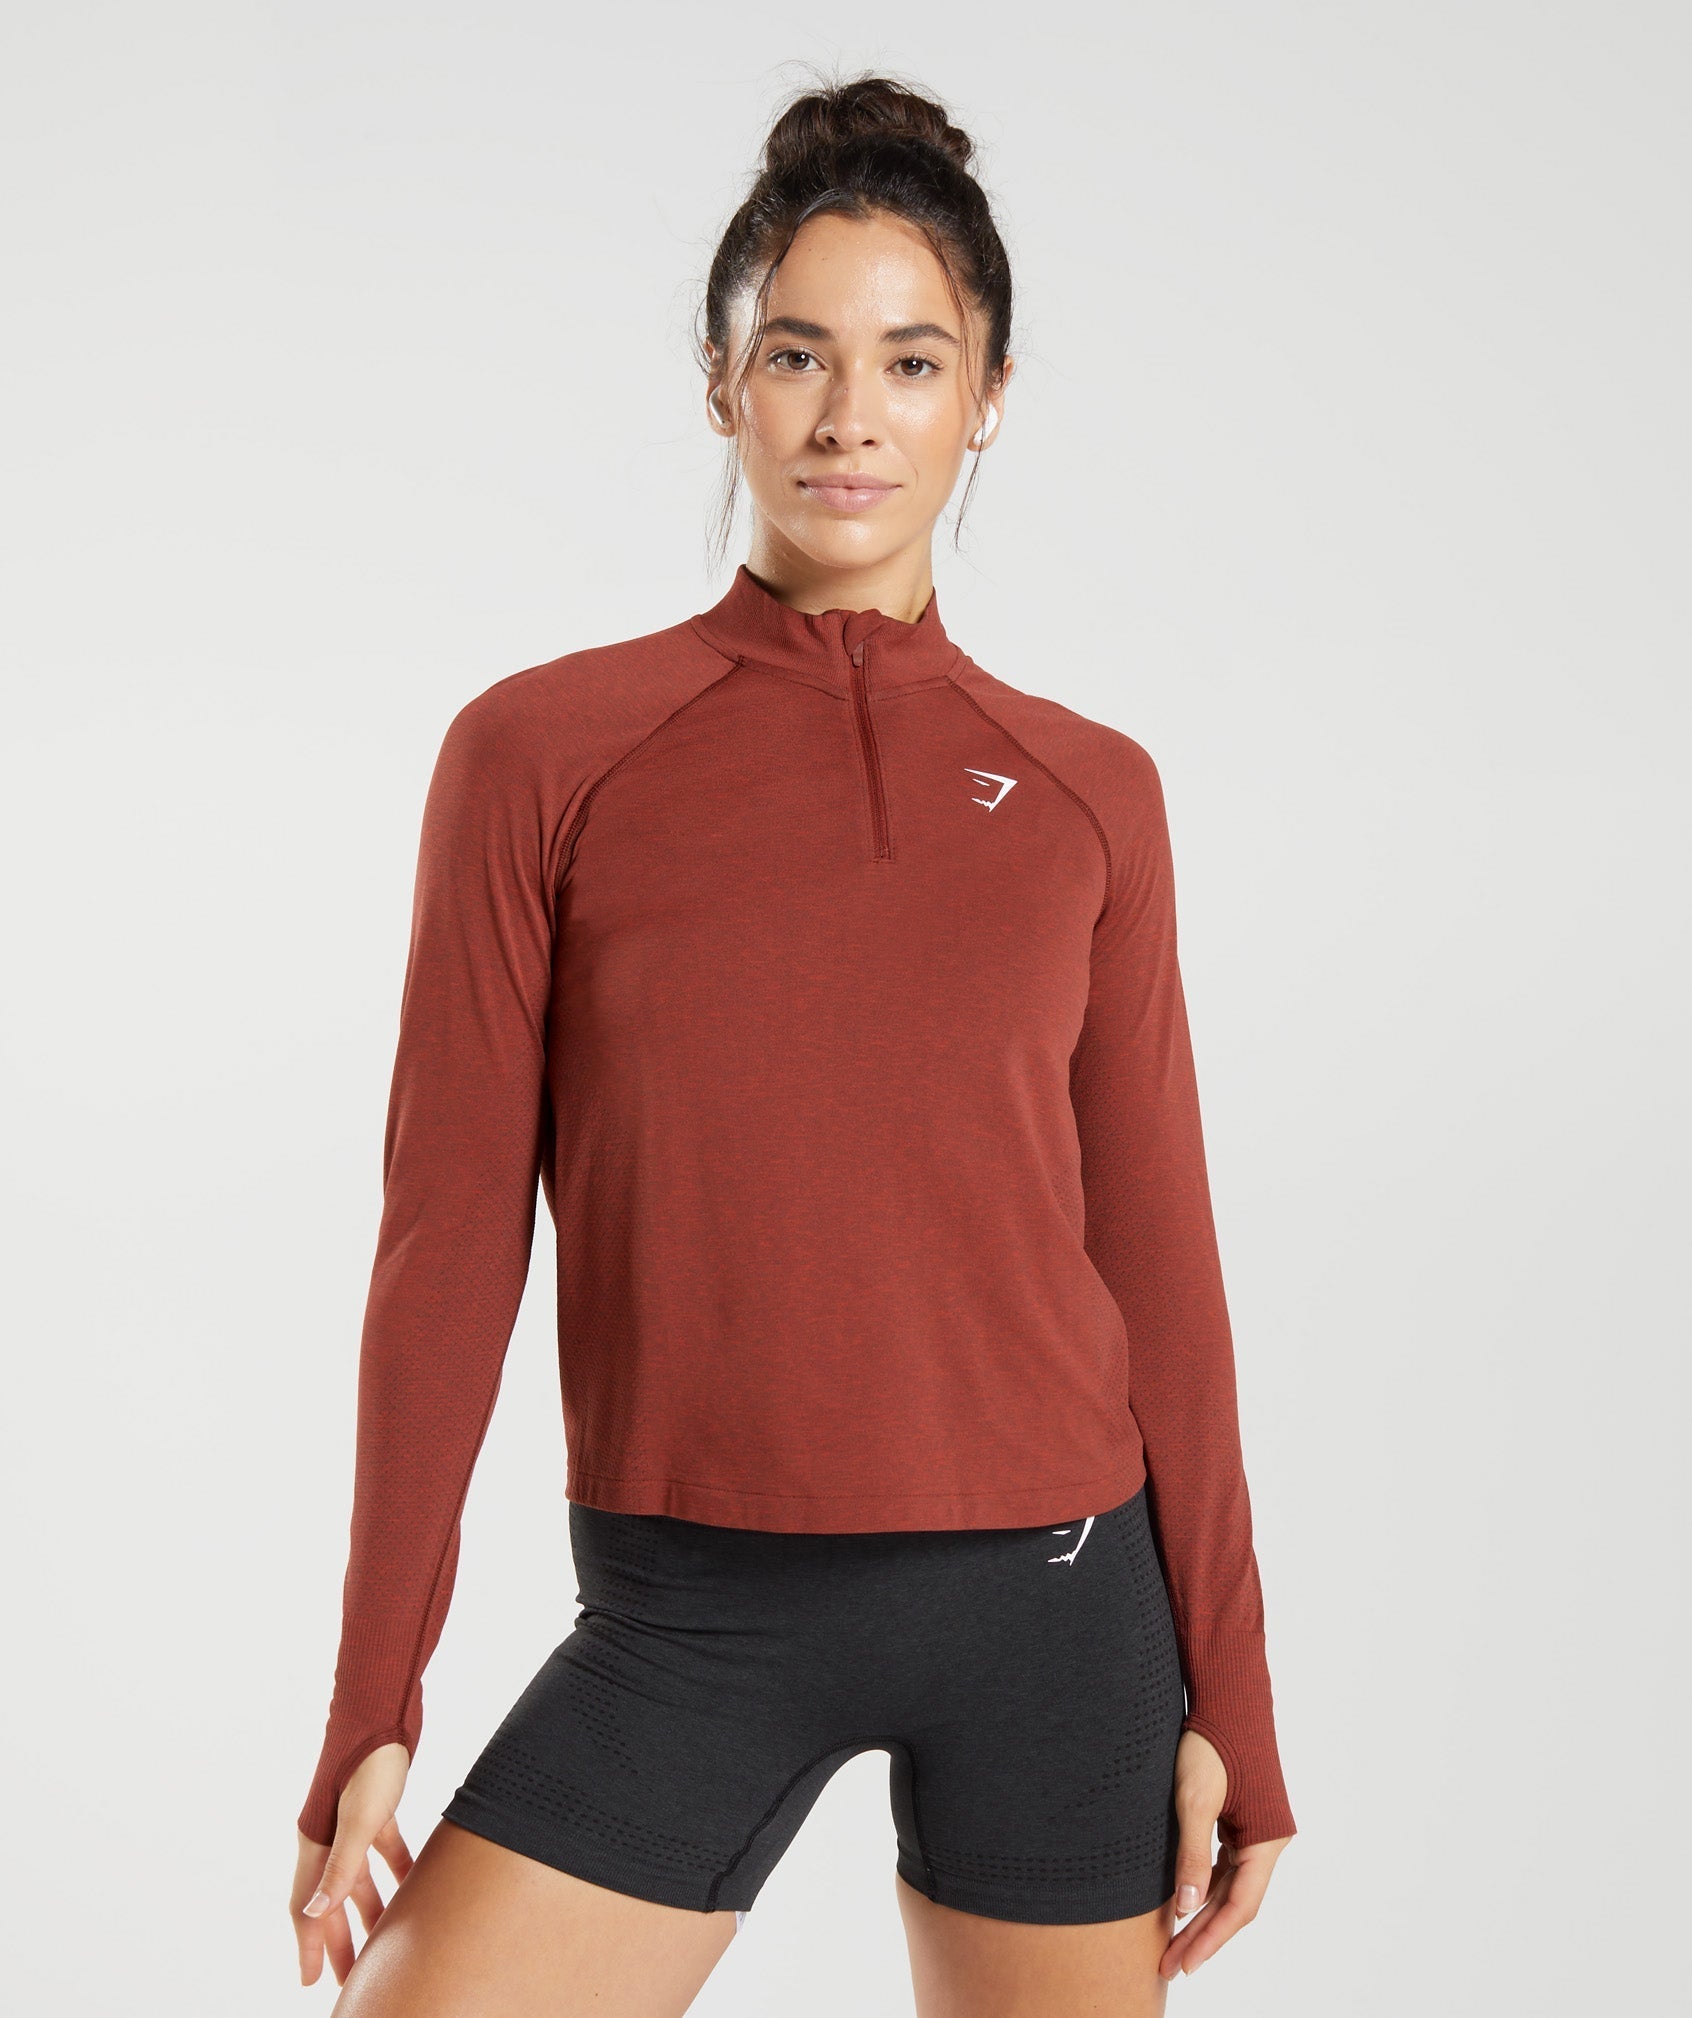 Vital Seamless 2.0 1/4 Track Top in Brick Red Marl - view 1